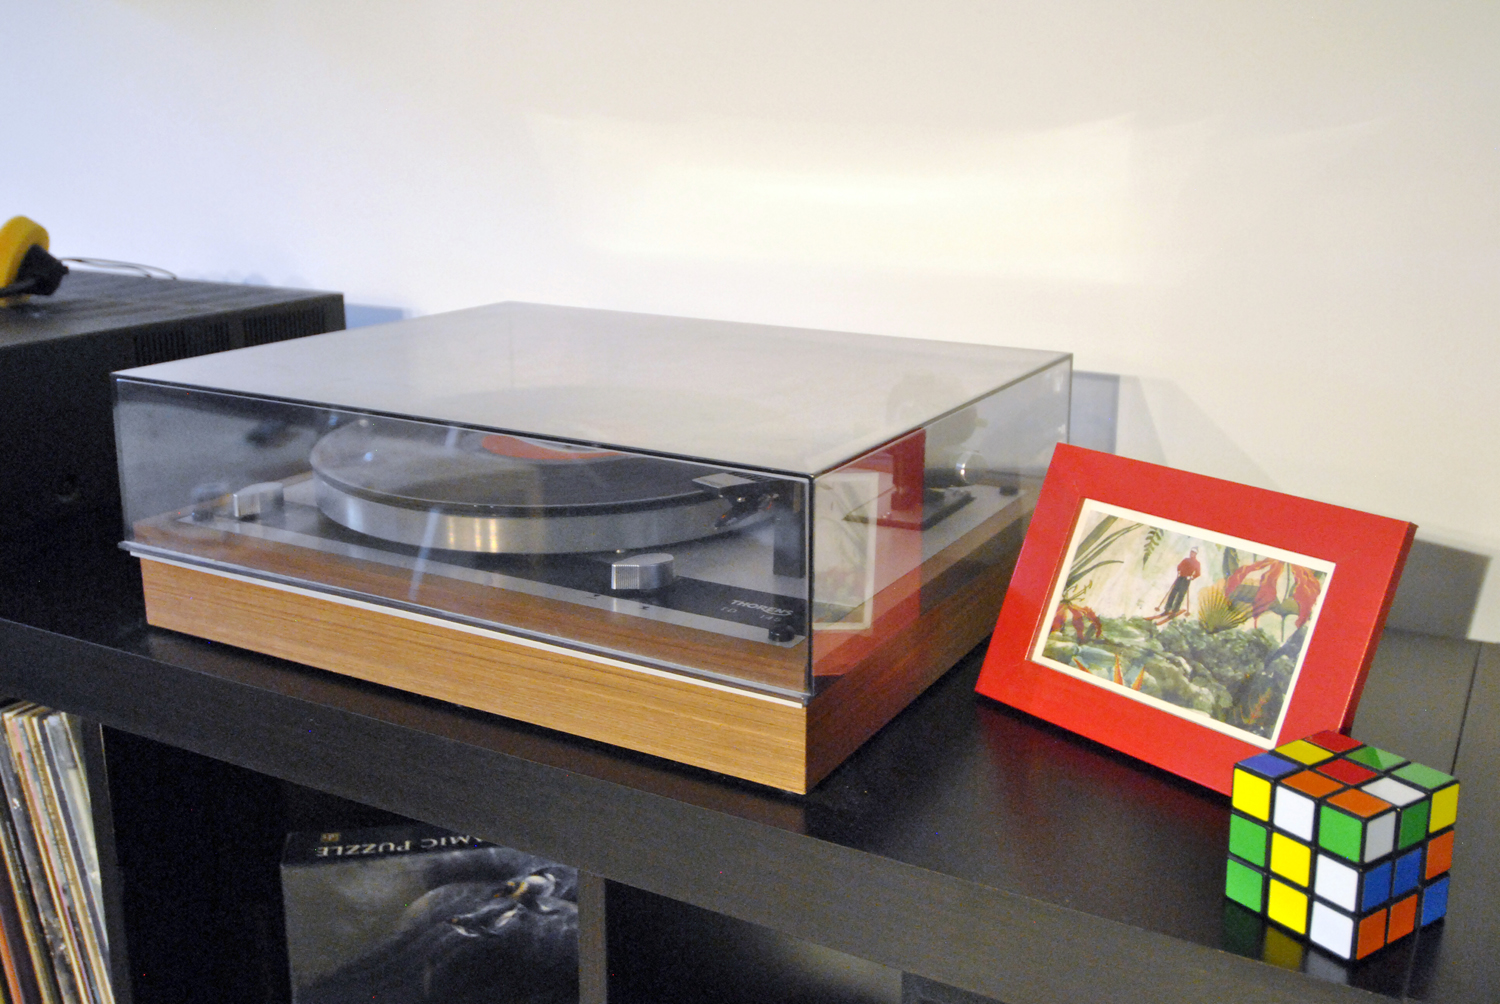 A vintage record player in a basement apartment